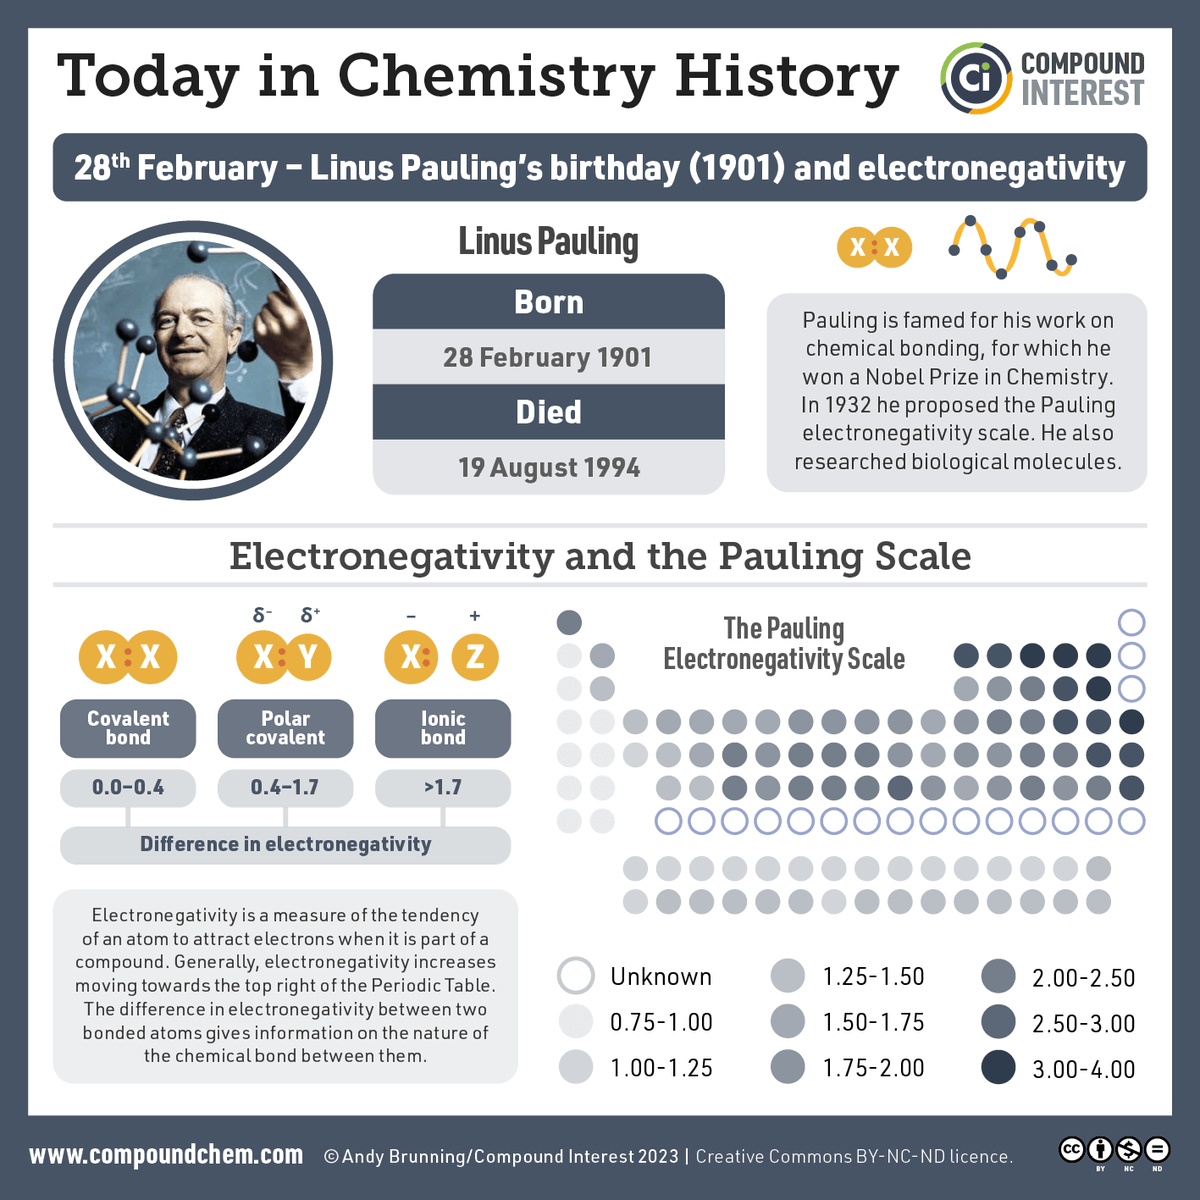 Linus Pauling was born #OTD (28 Feb) in 1901. Famed for his electronegativity scale, work on chemical bonding, and some slightly nutty ideas about vitamin C in his later years, he won the 1954 Nobel Prize in Chemistry. More detail and PDF download here: compoundchem.com/2017/02/28/pau…